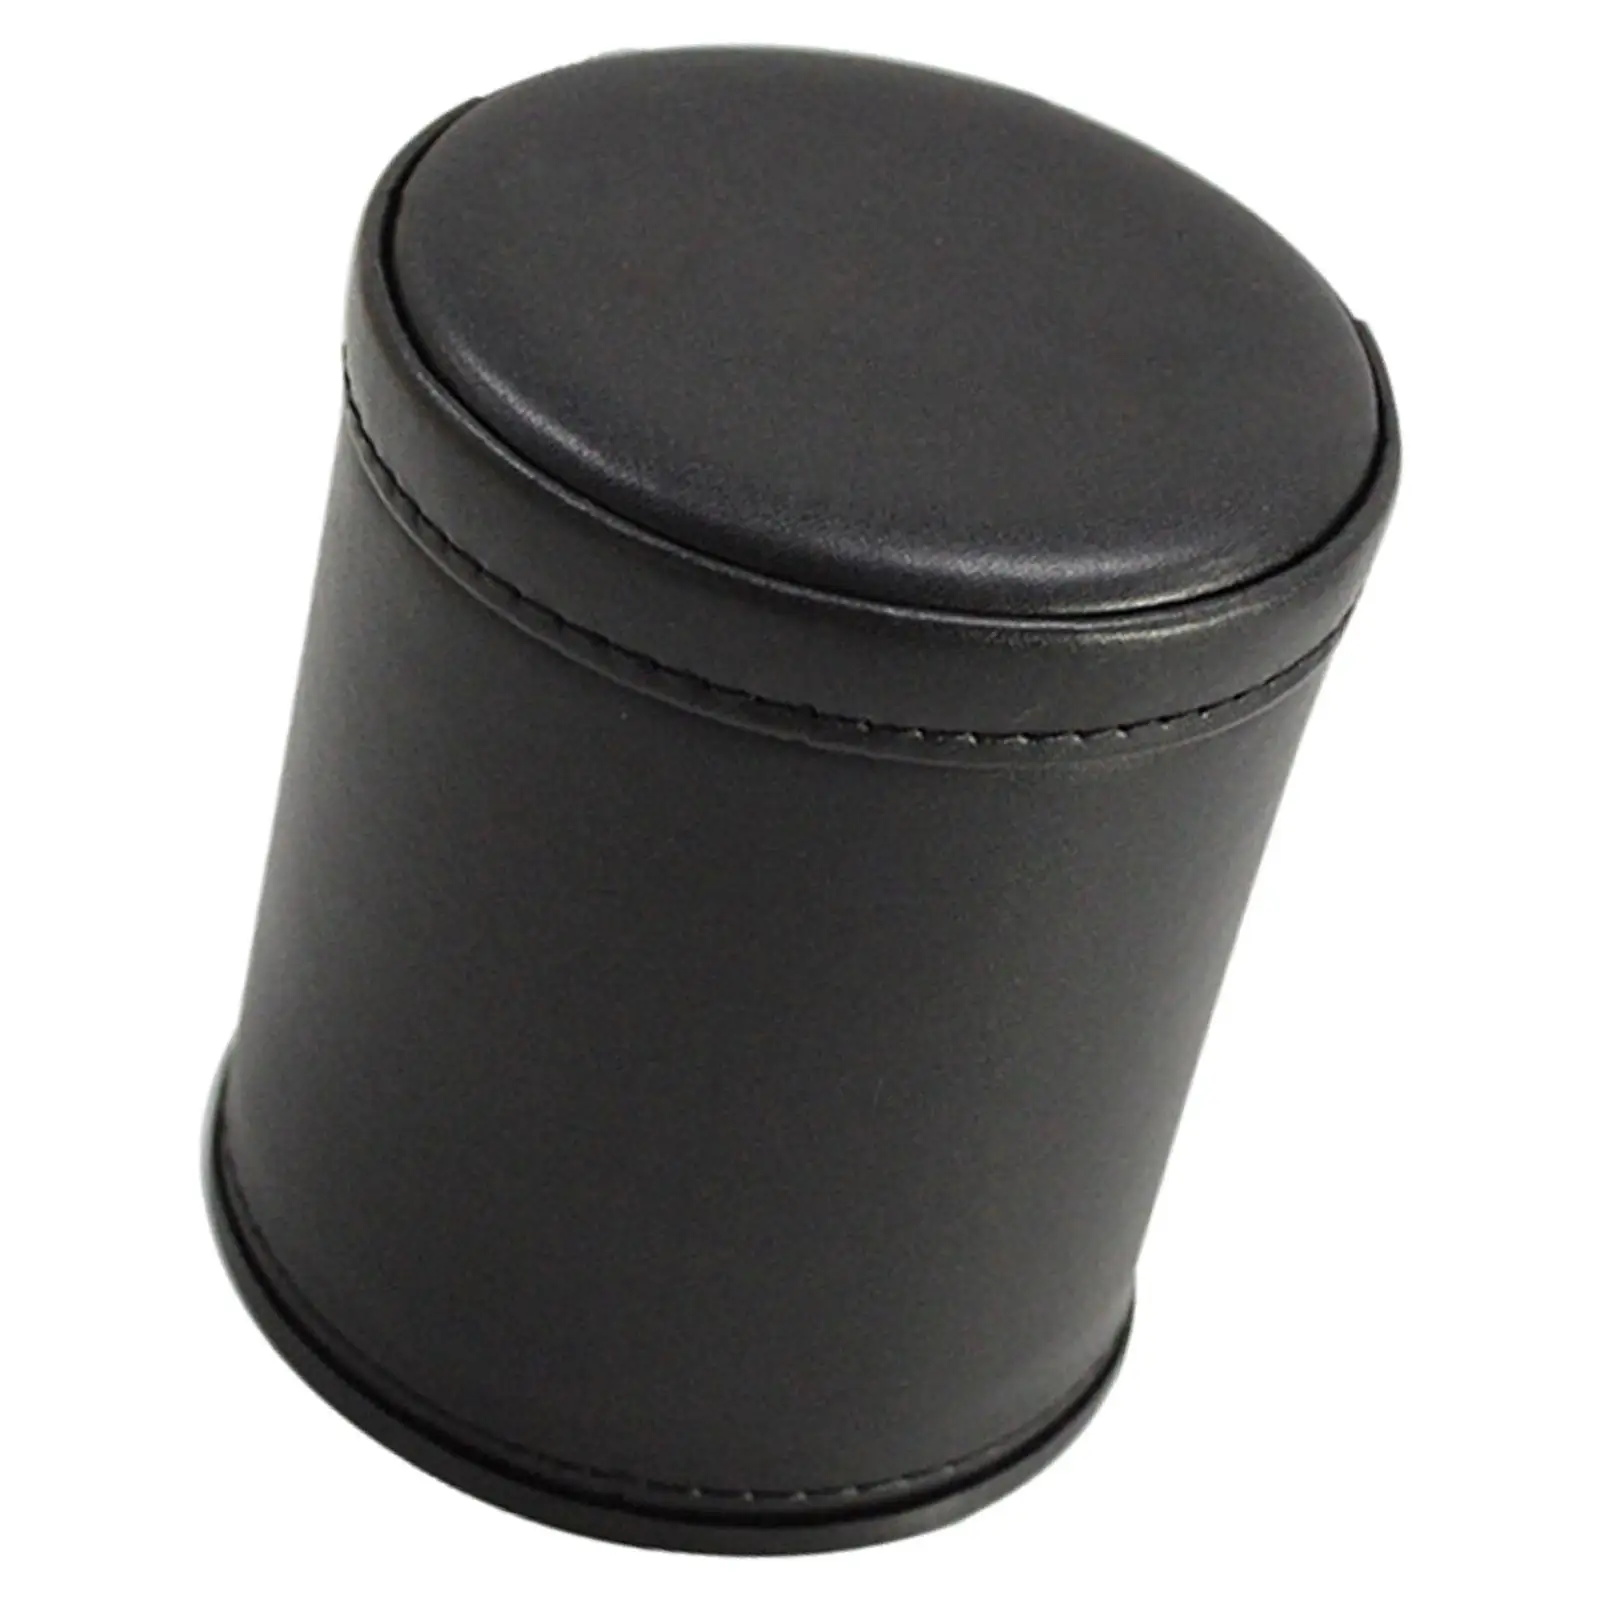 Protable Dice Cup Entertainment Dice Game Accessories Leather for Home Party